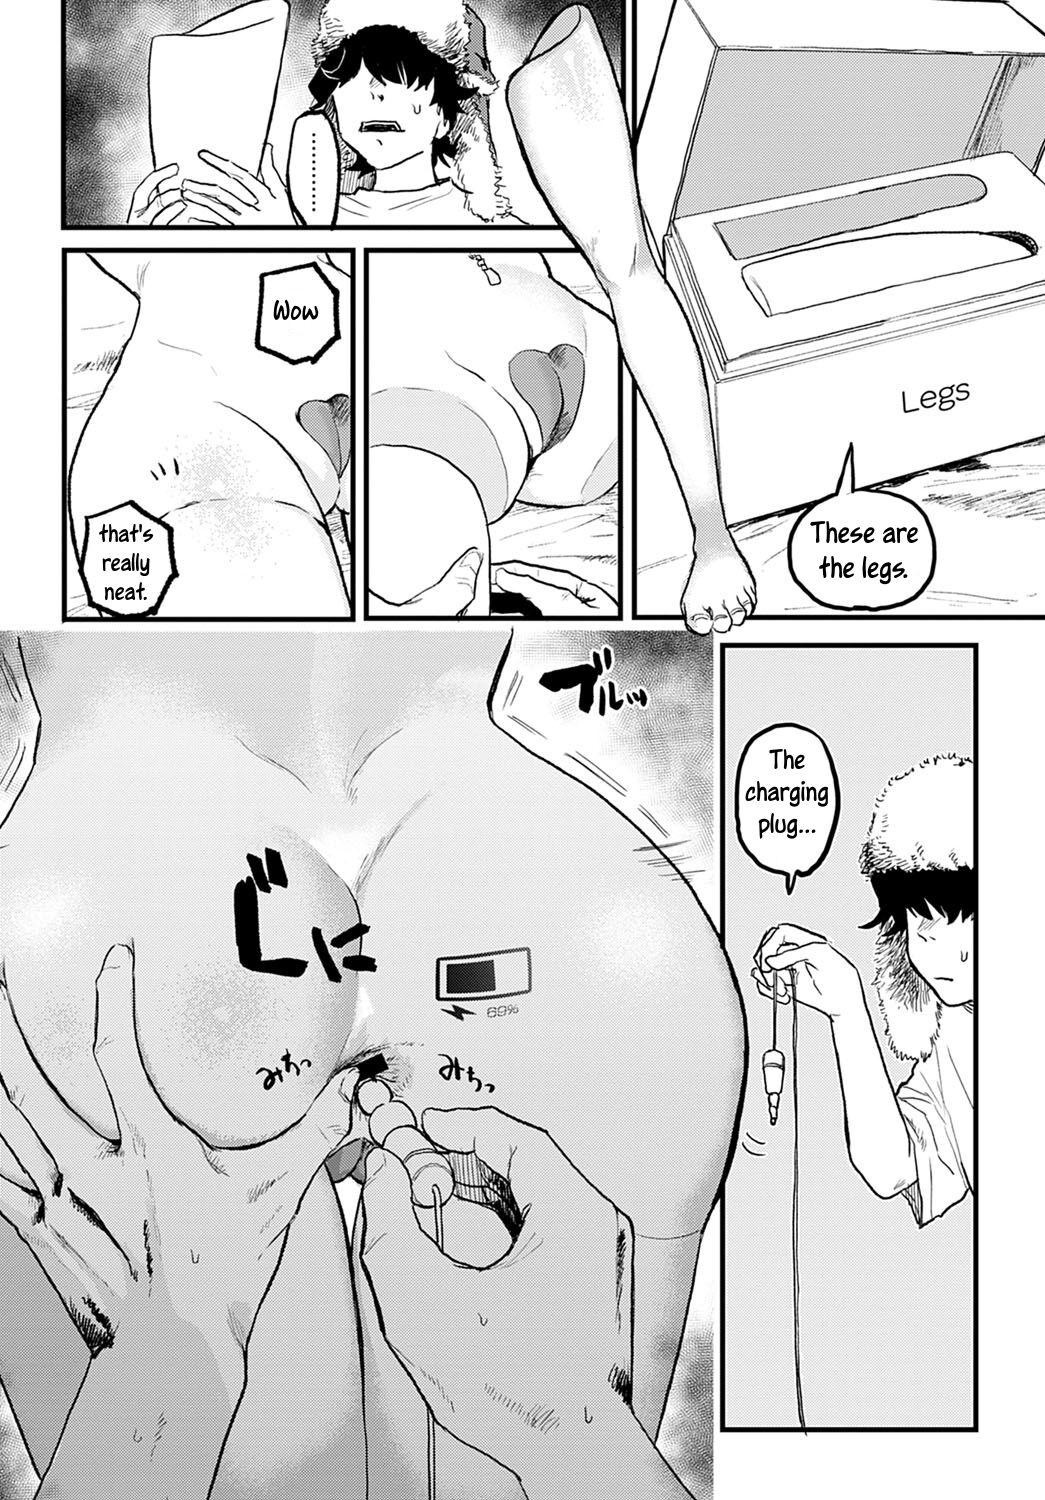 Dykes Better than Sex Ch. 1-6 18yearsold - Page 3